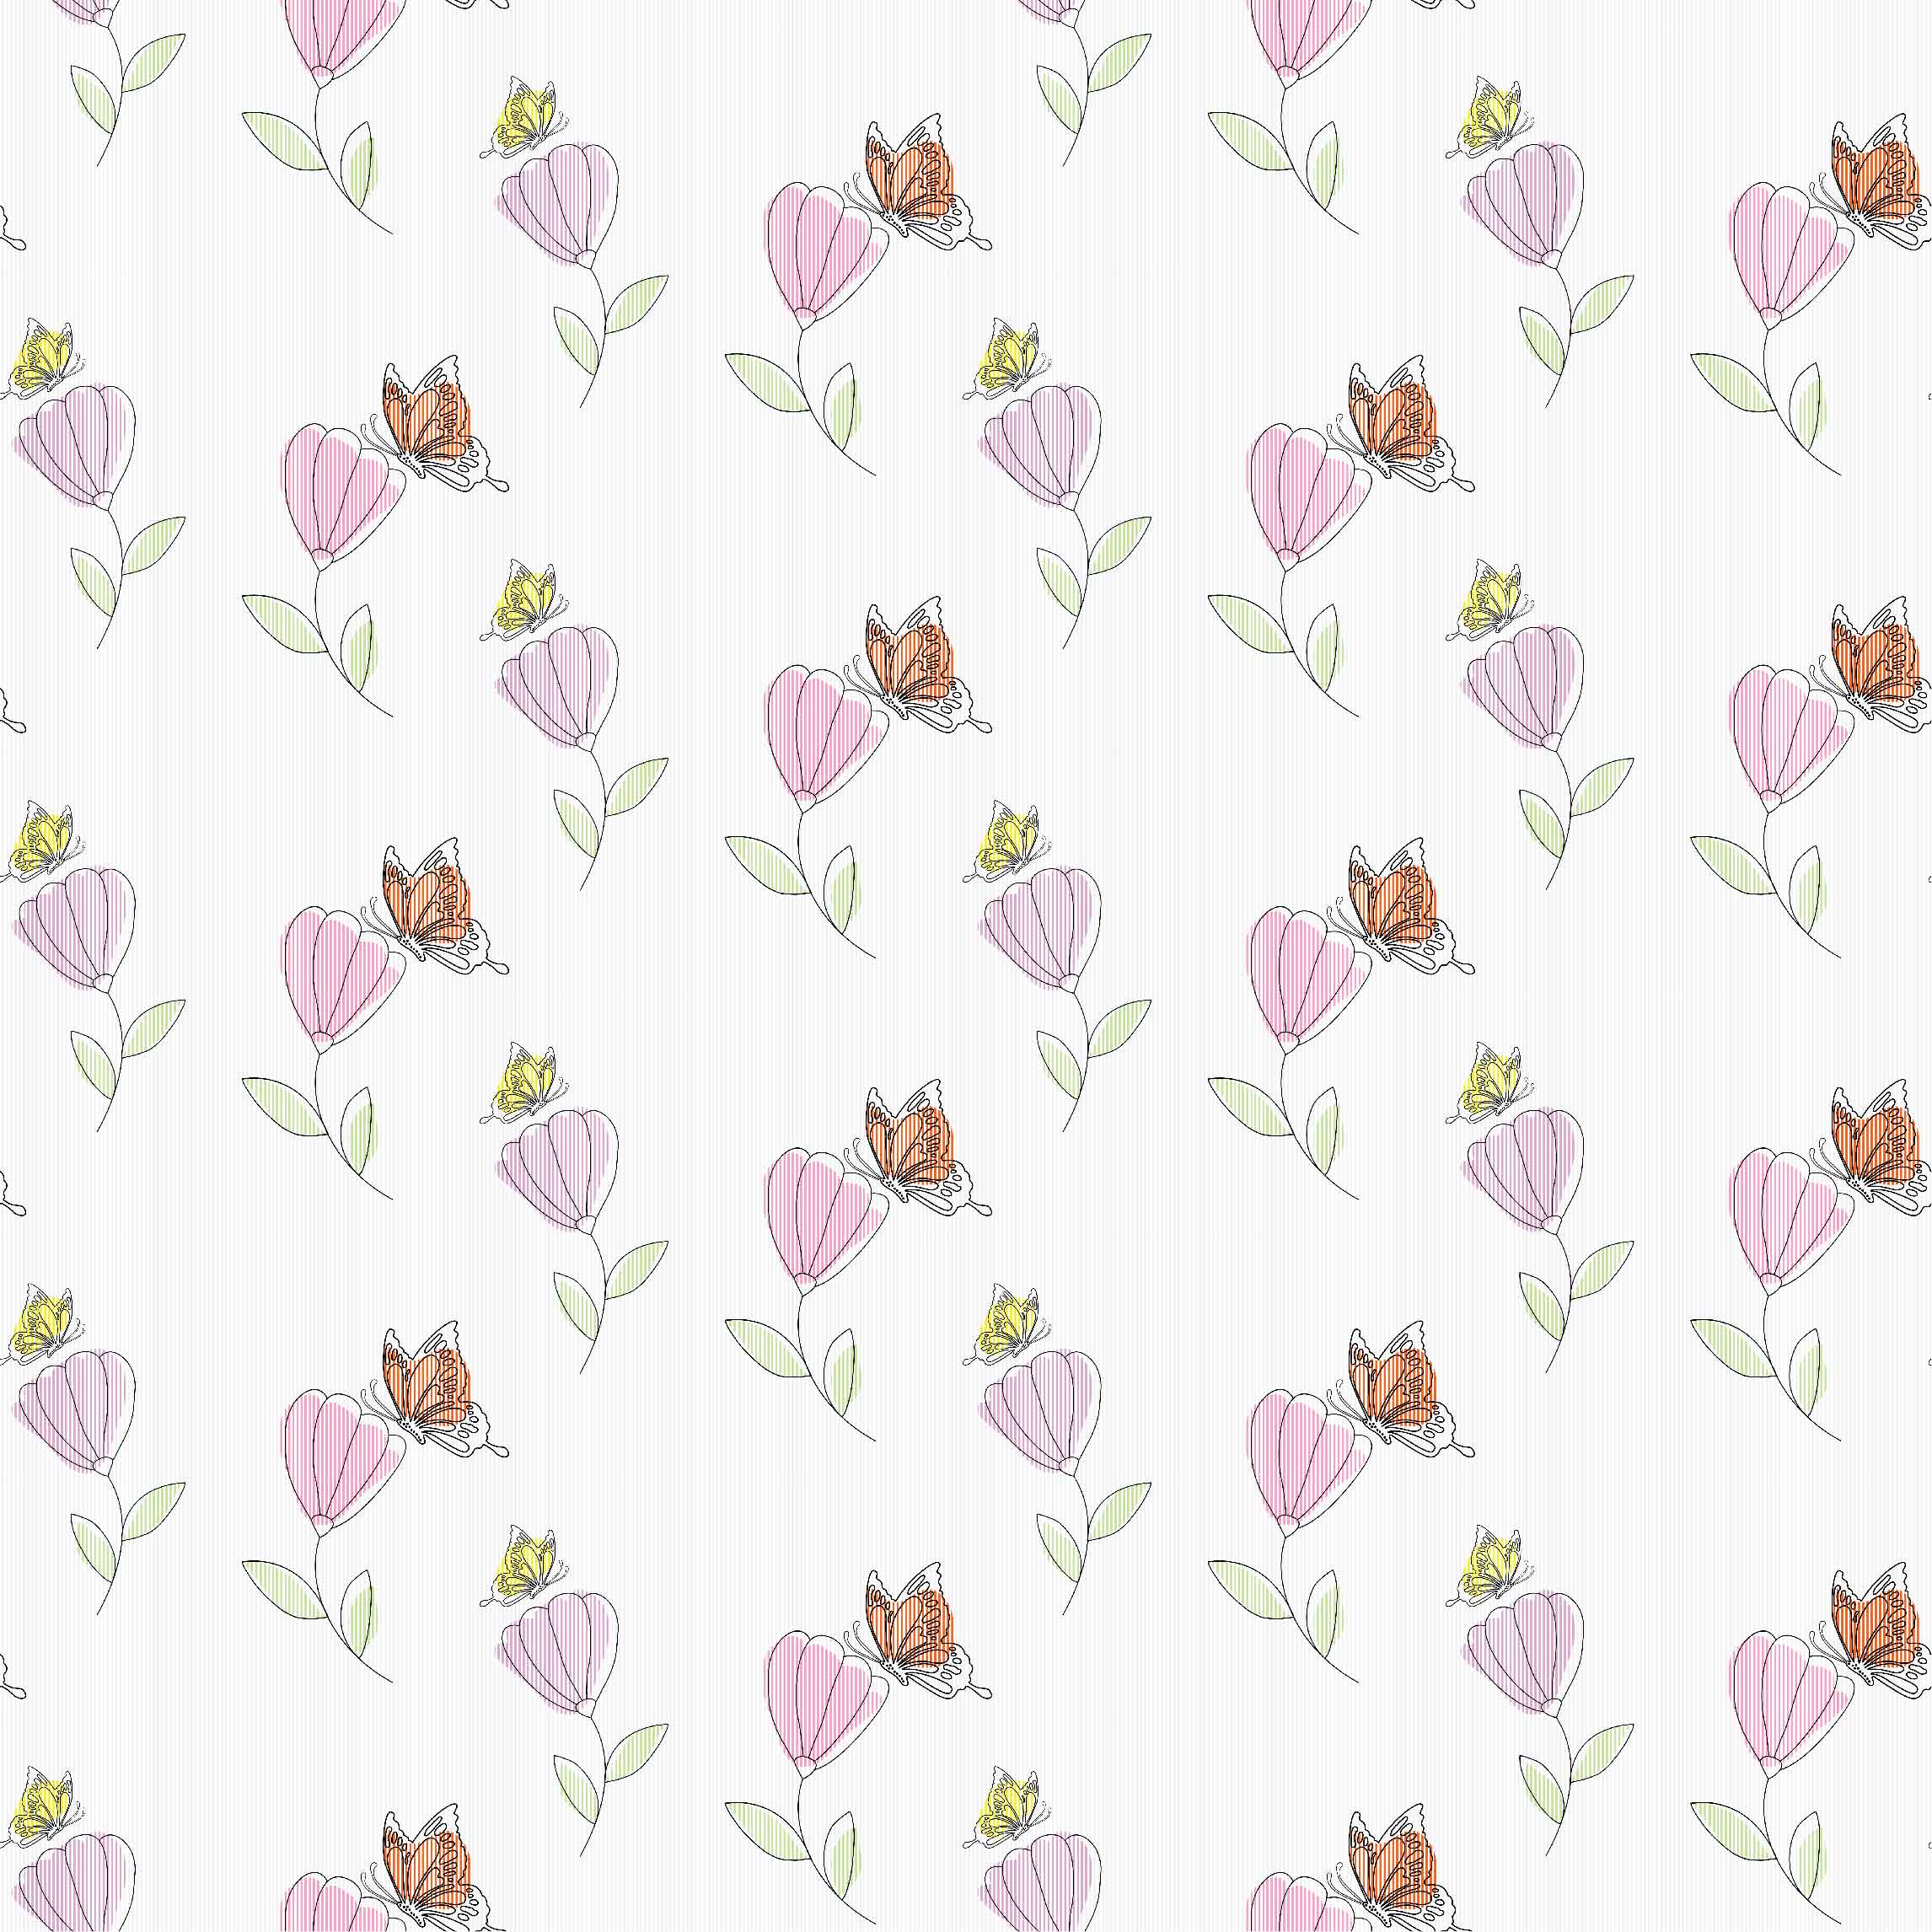 Minimal Floral Seamless Pattern Designs cover image.